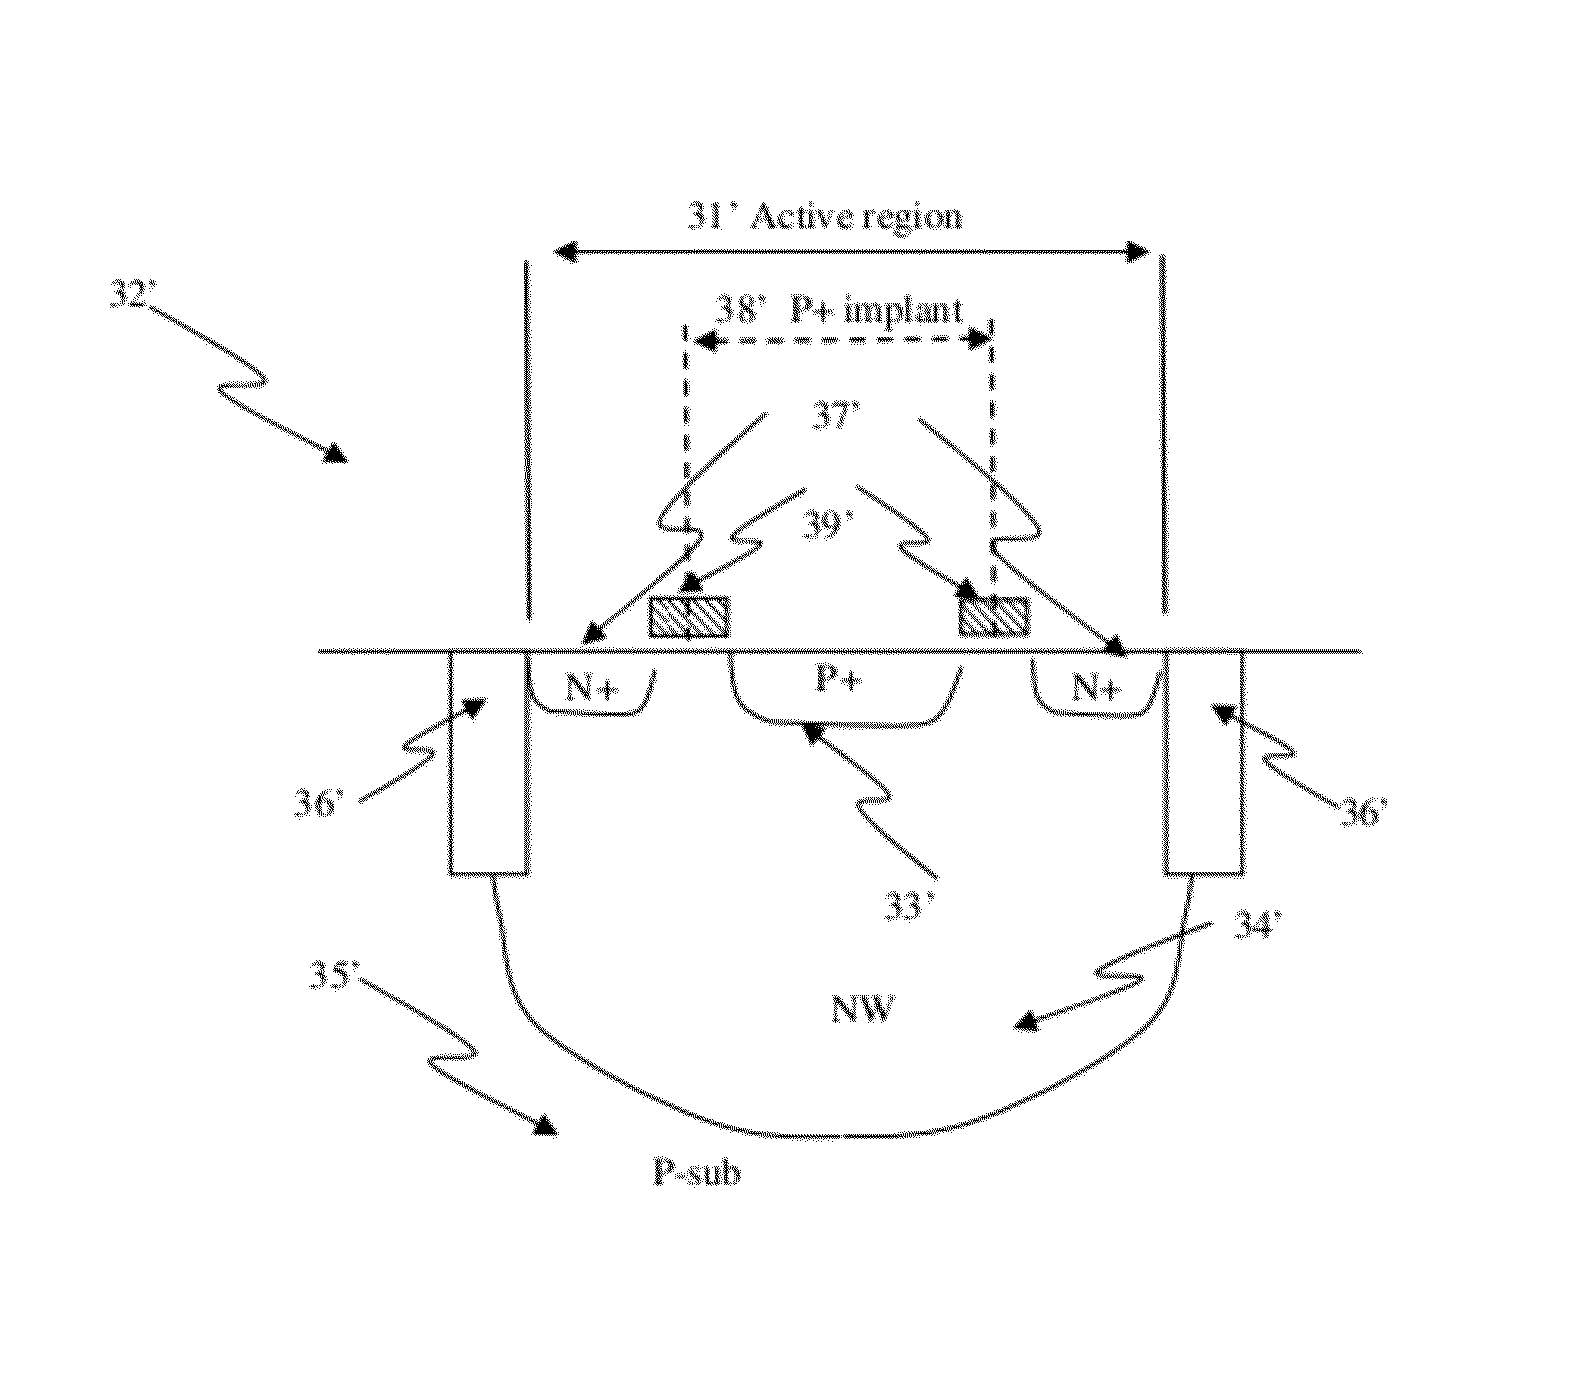 Circuit and system of using junction diode as program selector for one-time programmable devices